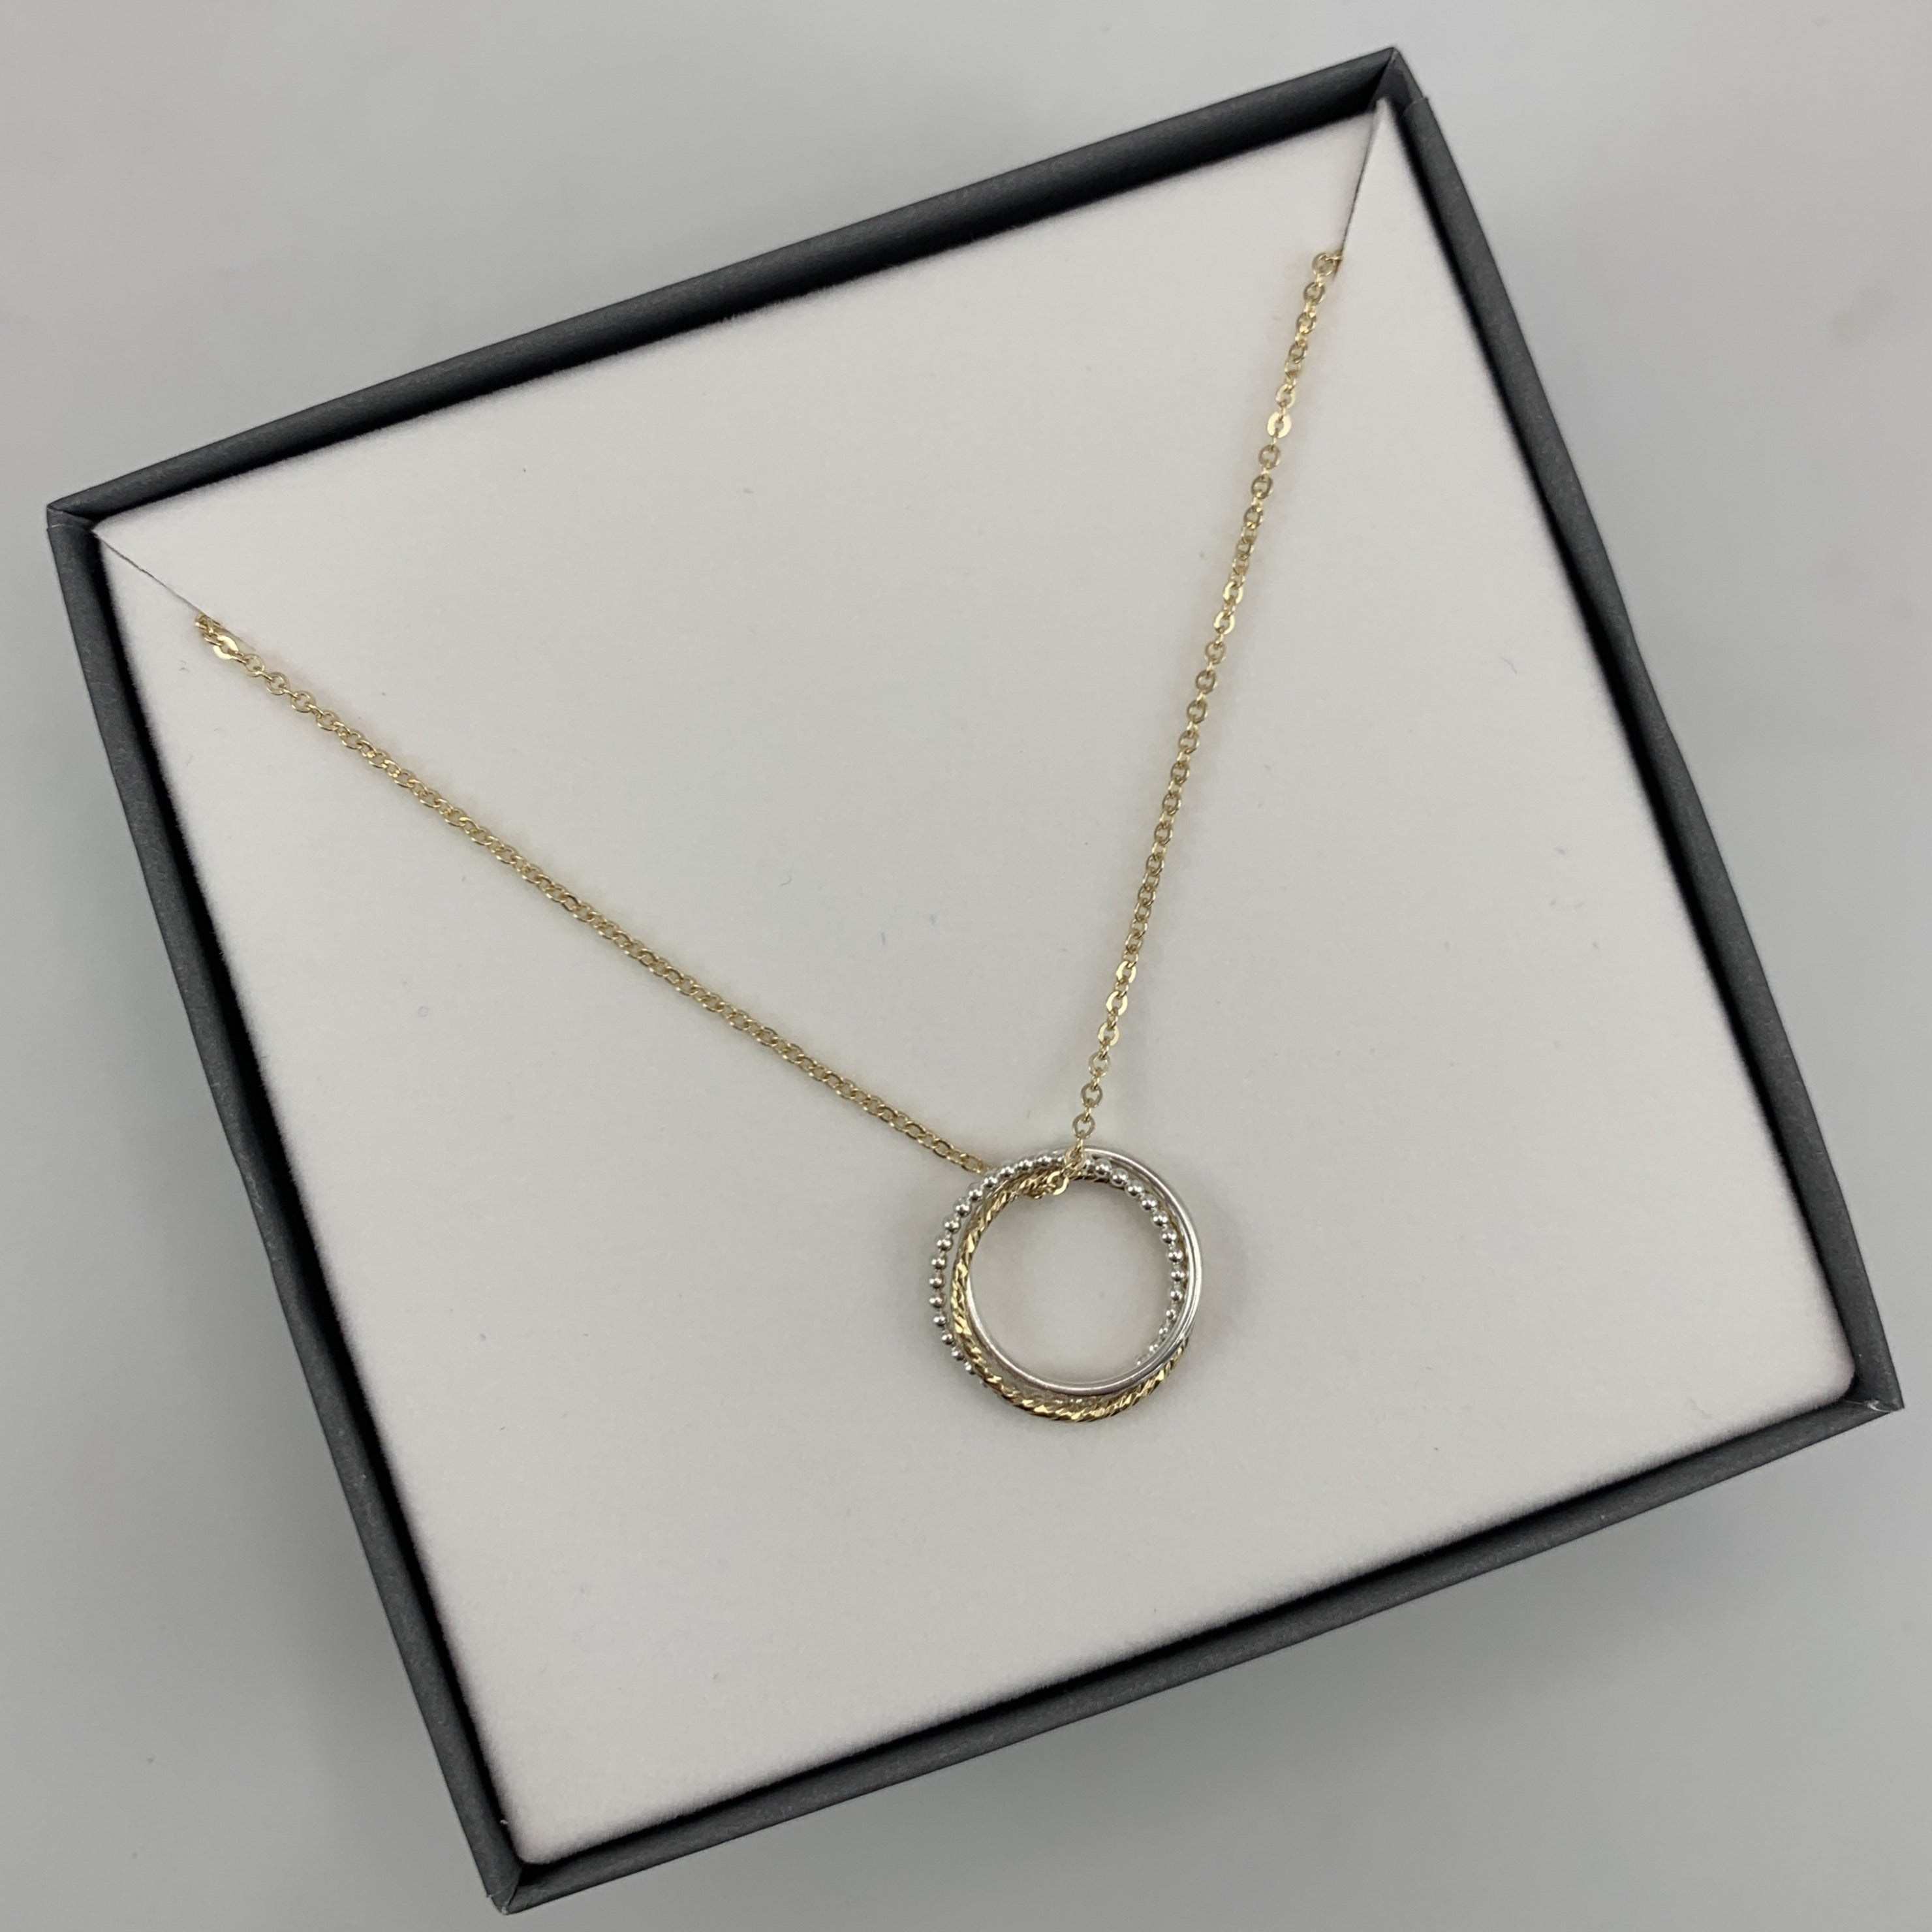 Yellow Gold-Filled & Sterling Silver 3 Ring Necklace